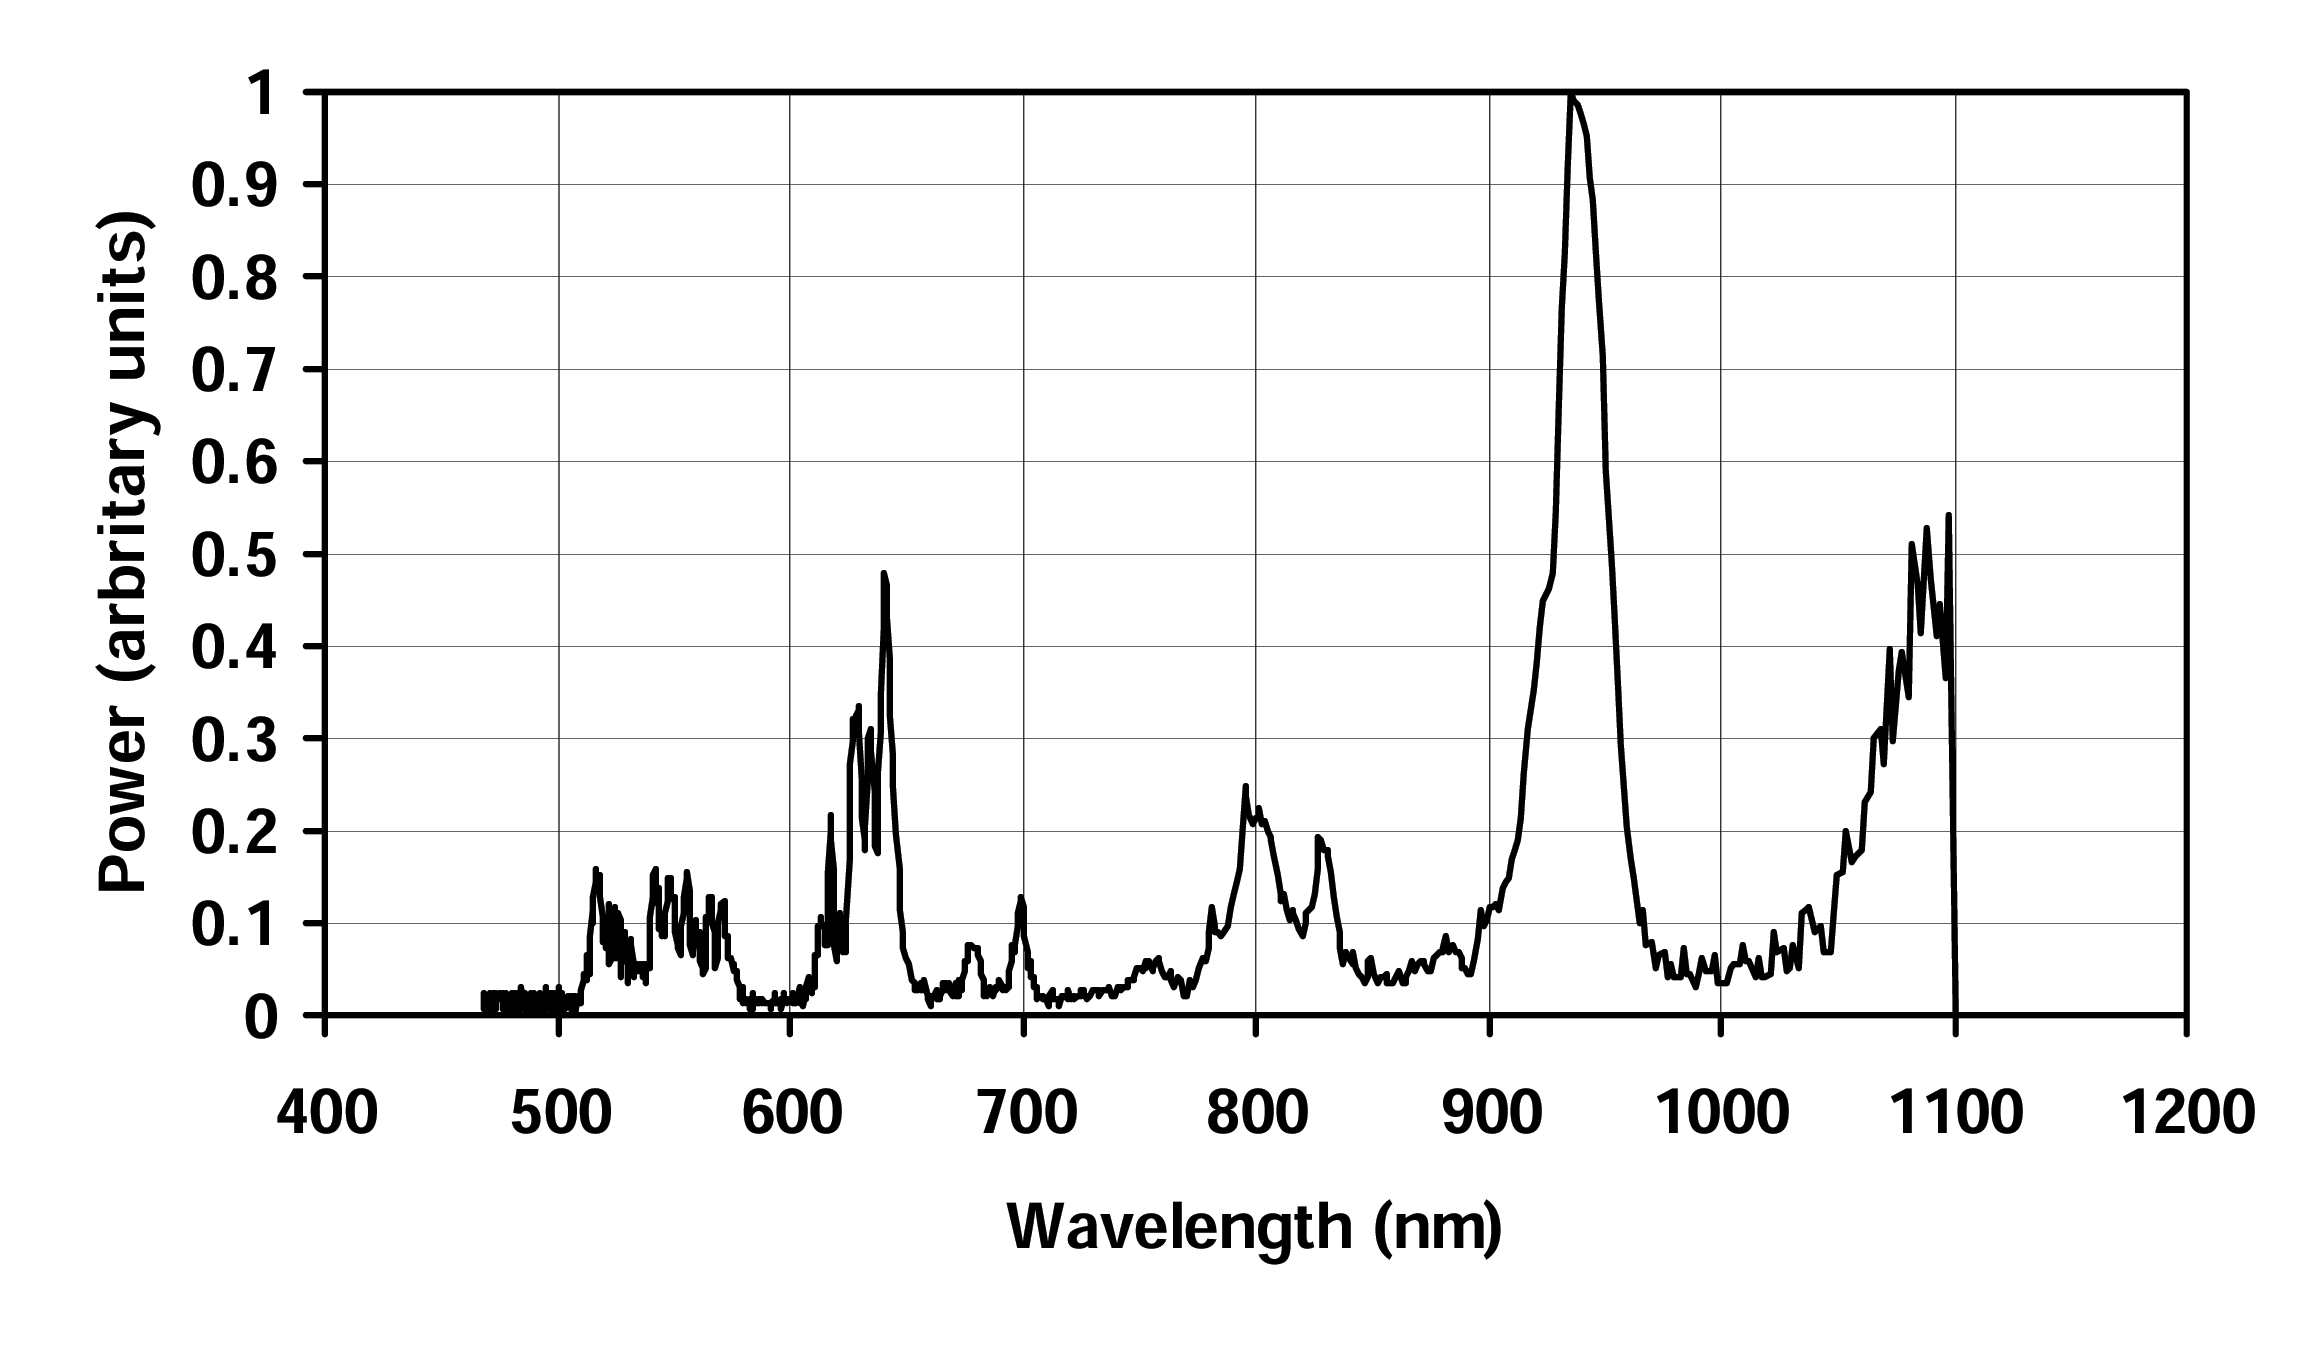 The spectrum of the comb after the microstructured fibre